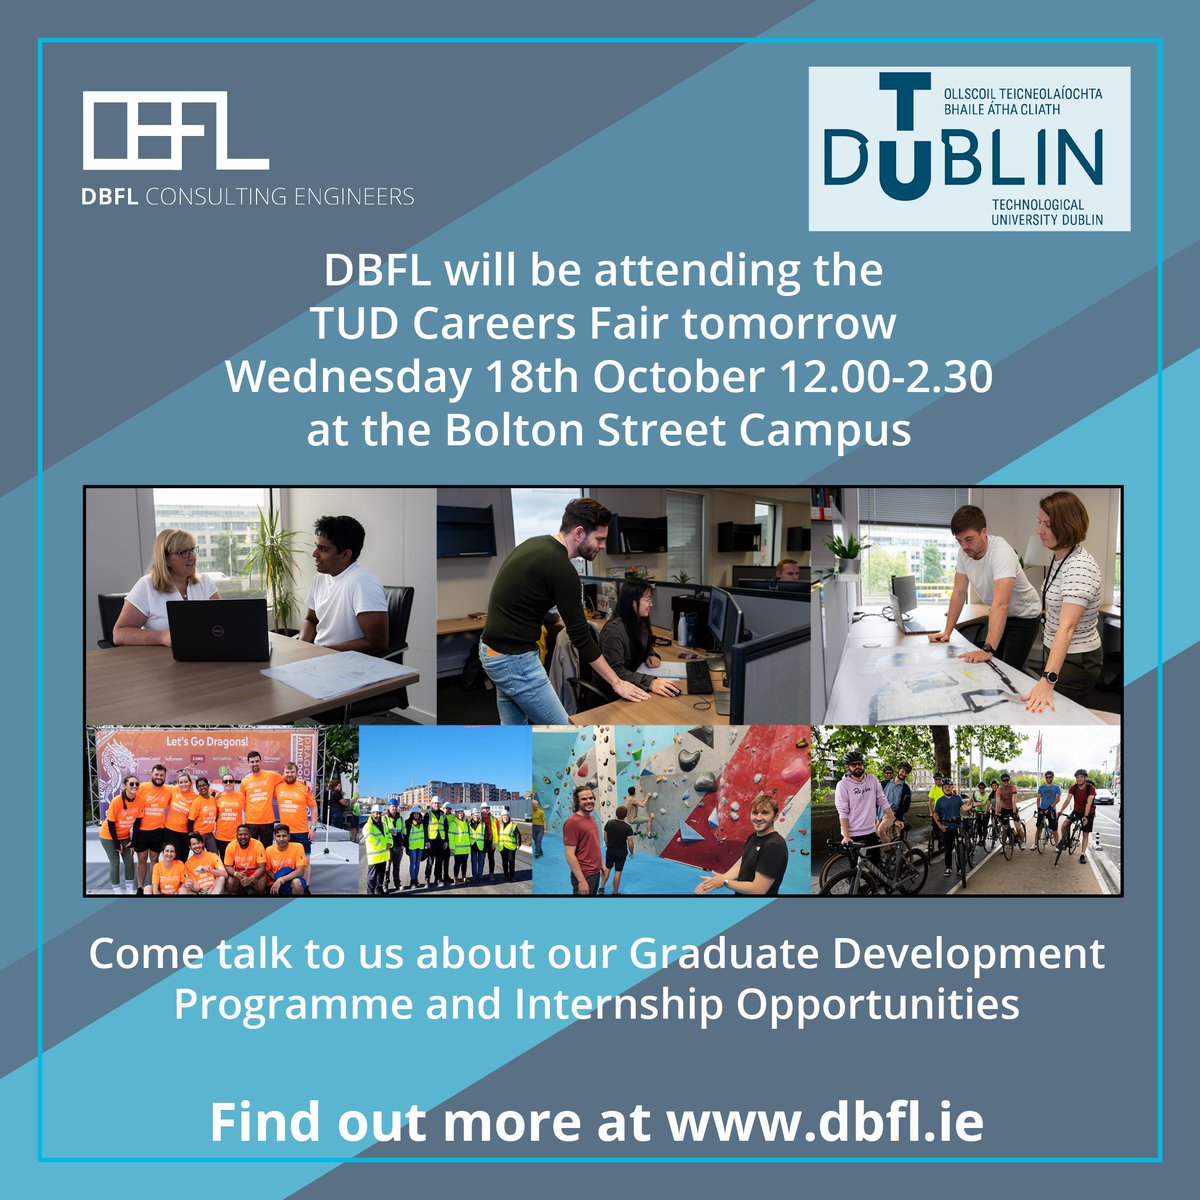 We'll be at the @WeAreTUDublin Careers Fair on Wednesday 18th Oct 12.00-2.30 at the Bolton Street Campus. Come chat with our team and ask about our Graduate Development Programme and Internship Opportunities. dbfl.ie #TUDCareersFair #TUDCareers #TUDEngineering